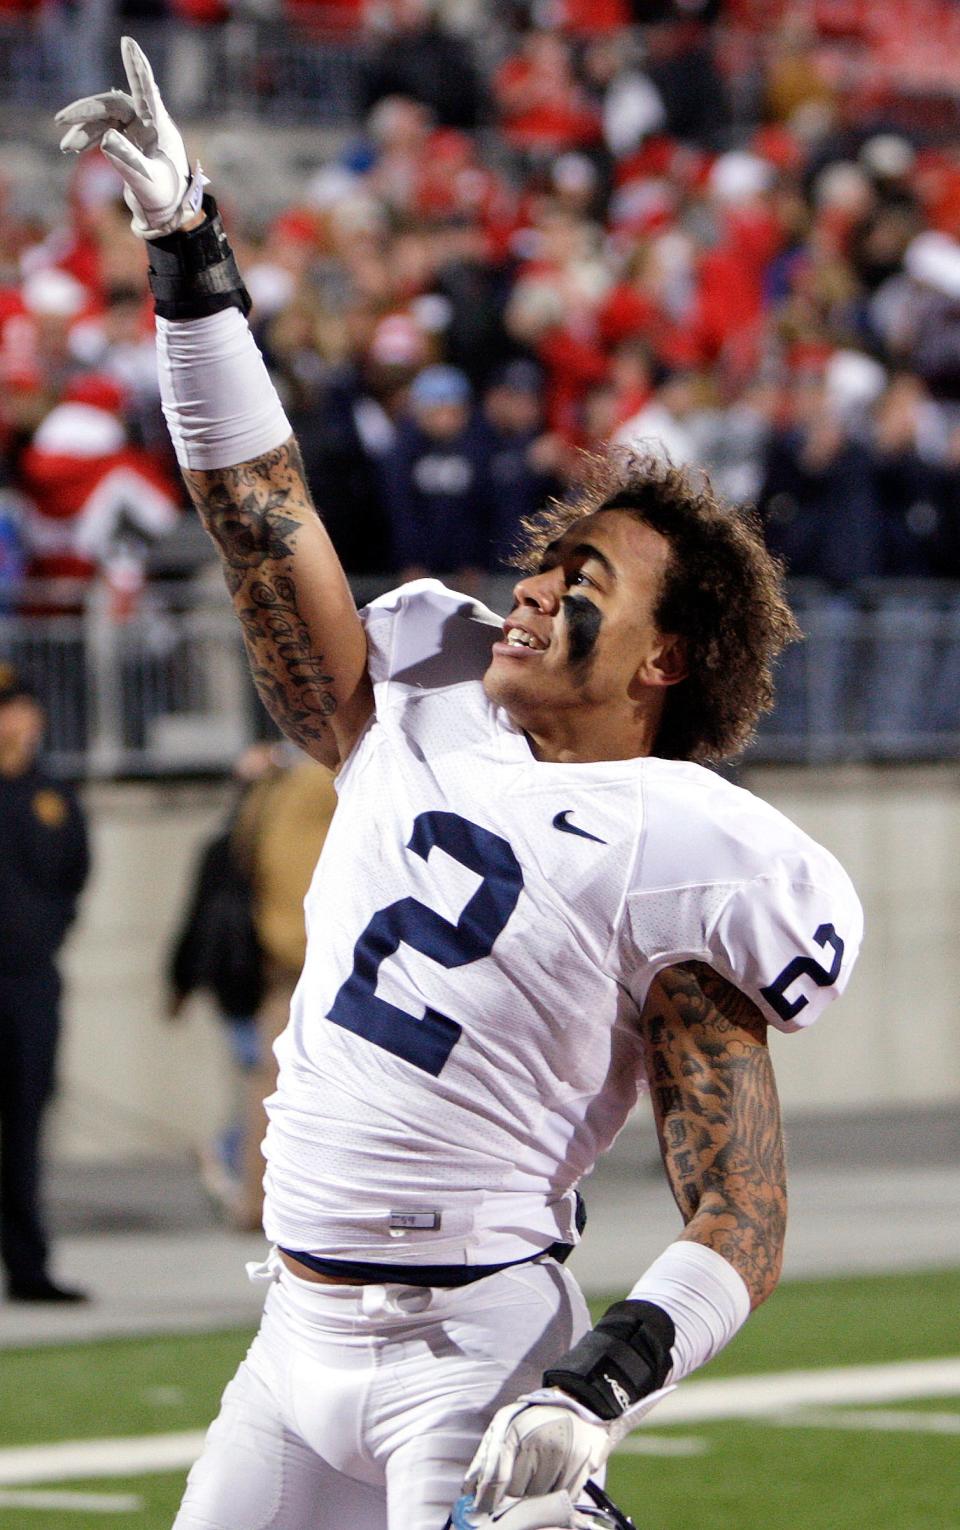 Chaz Powell celebrates after winning at Ohio State in November of 2011. One of Penn State's most versatile players ever, he hopes to pass on lessons learned now as an assistant coach at York High.